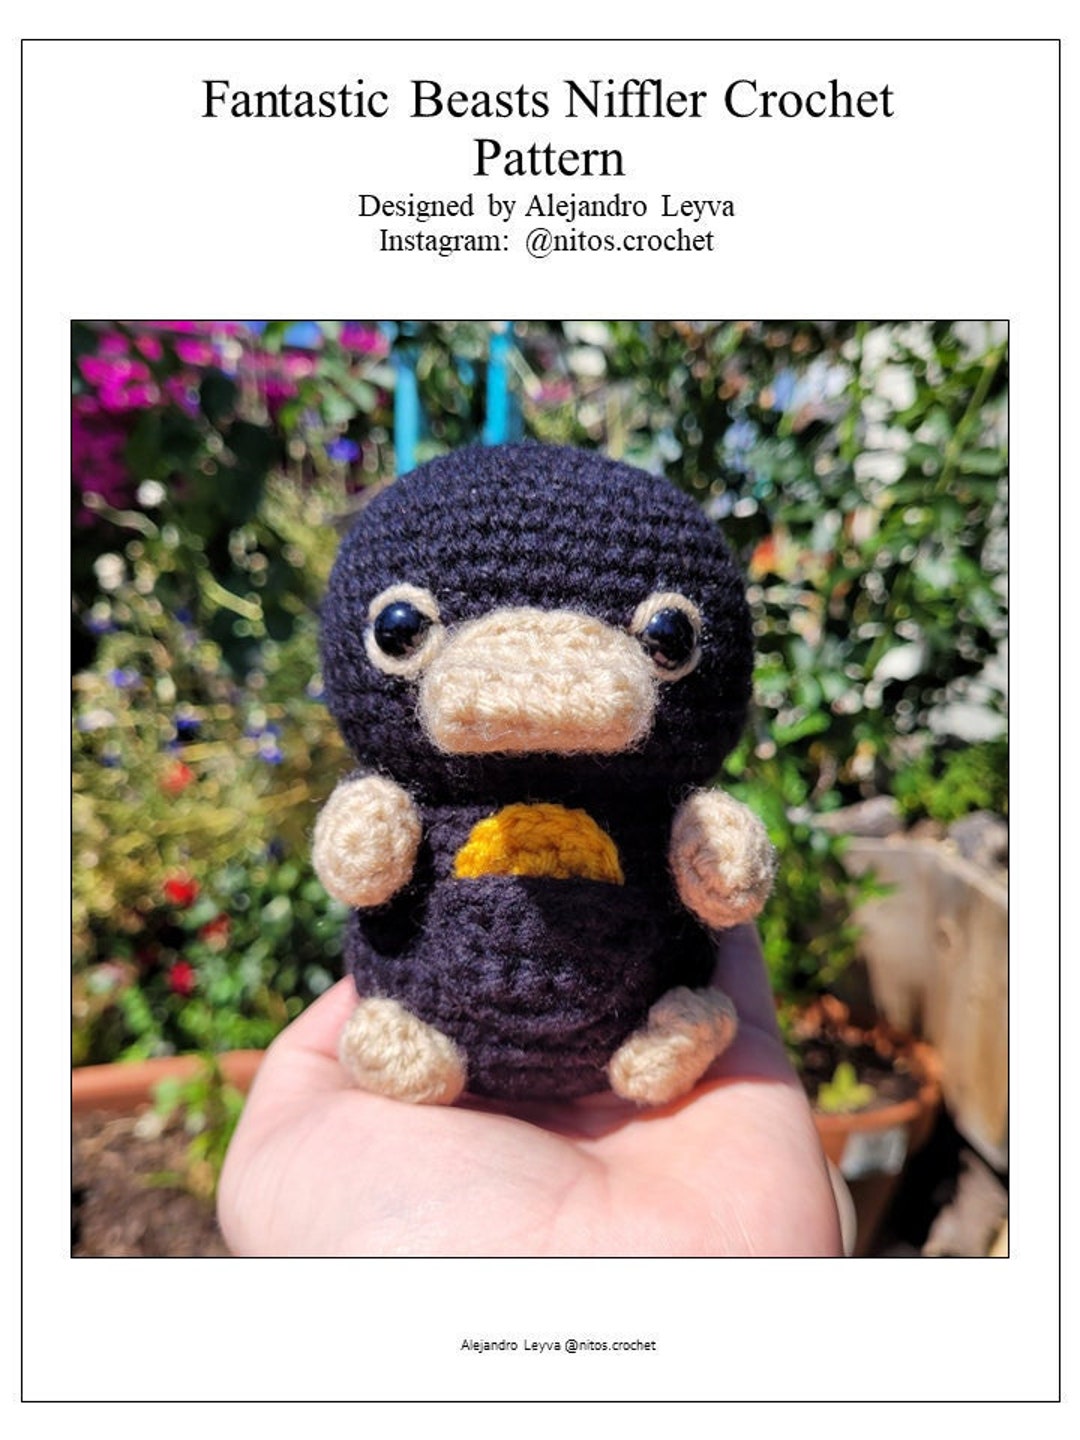 The Woobles 4.5 Turtle Crochet Kit